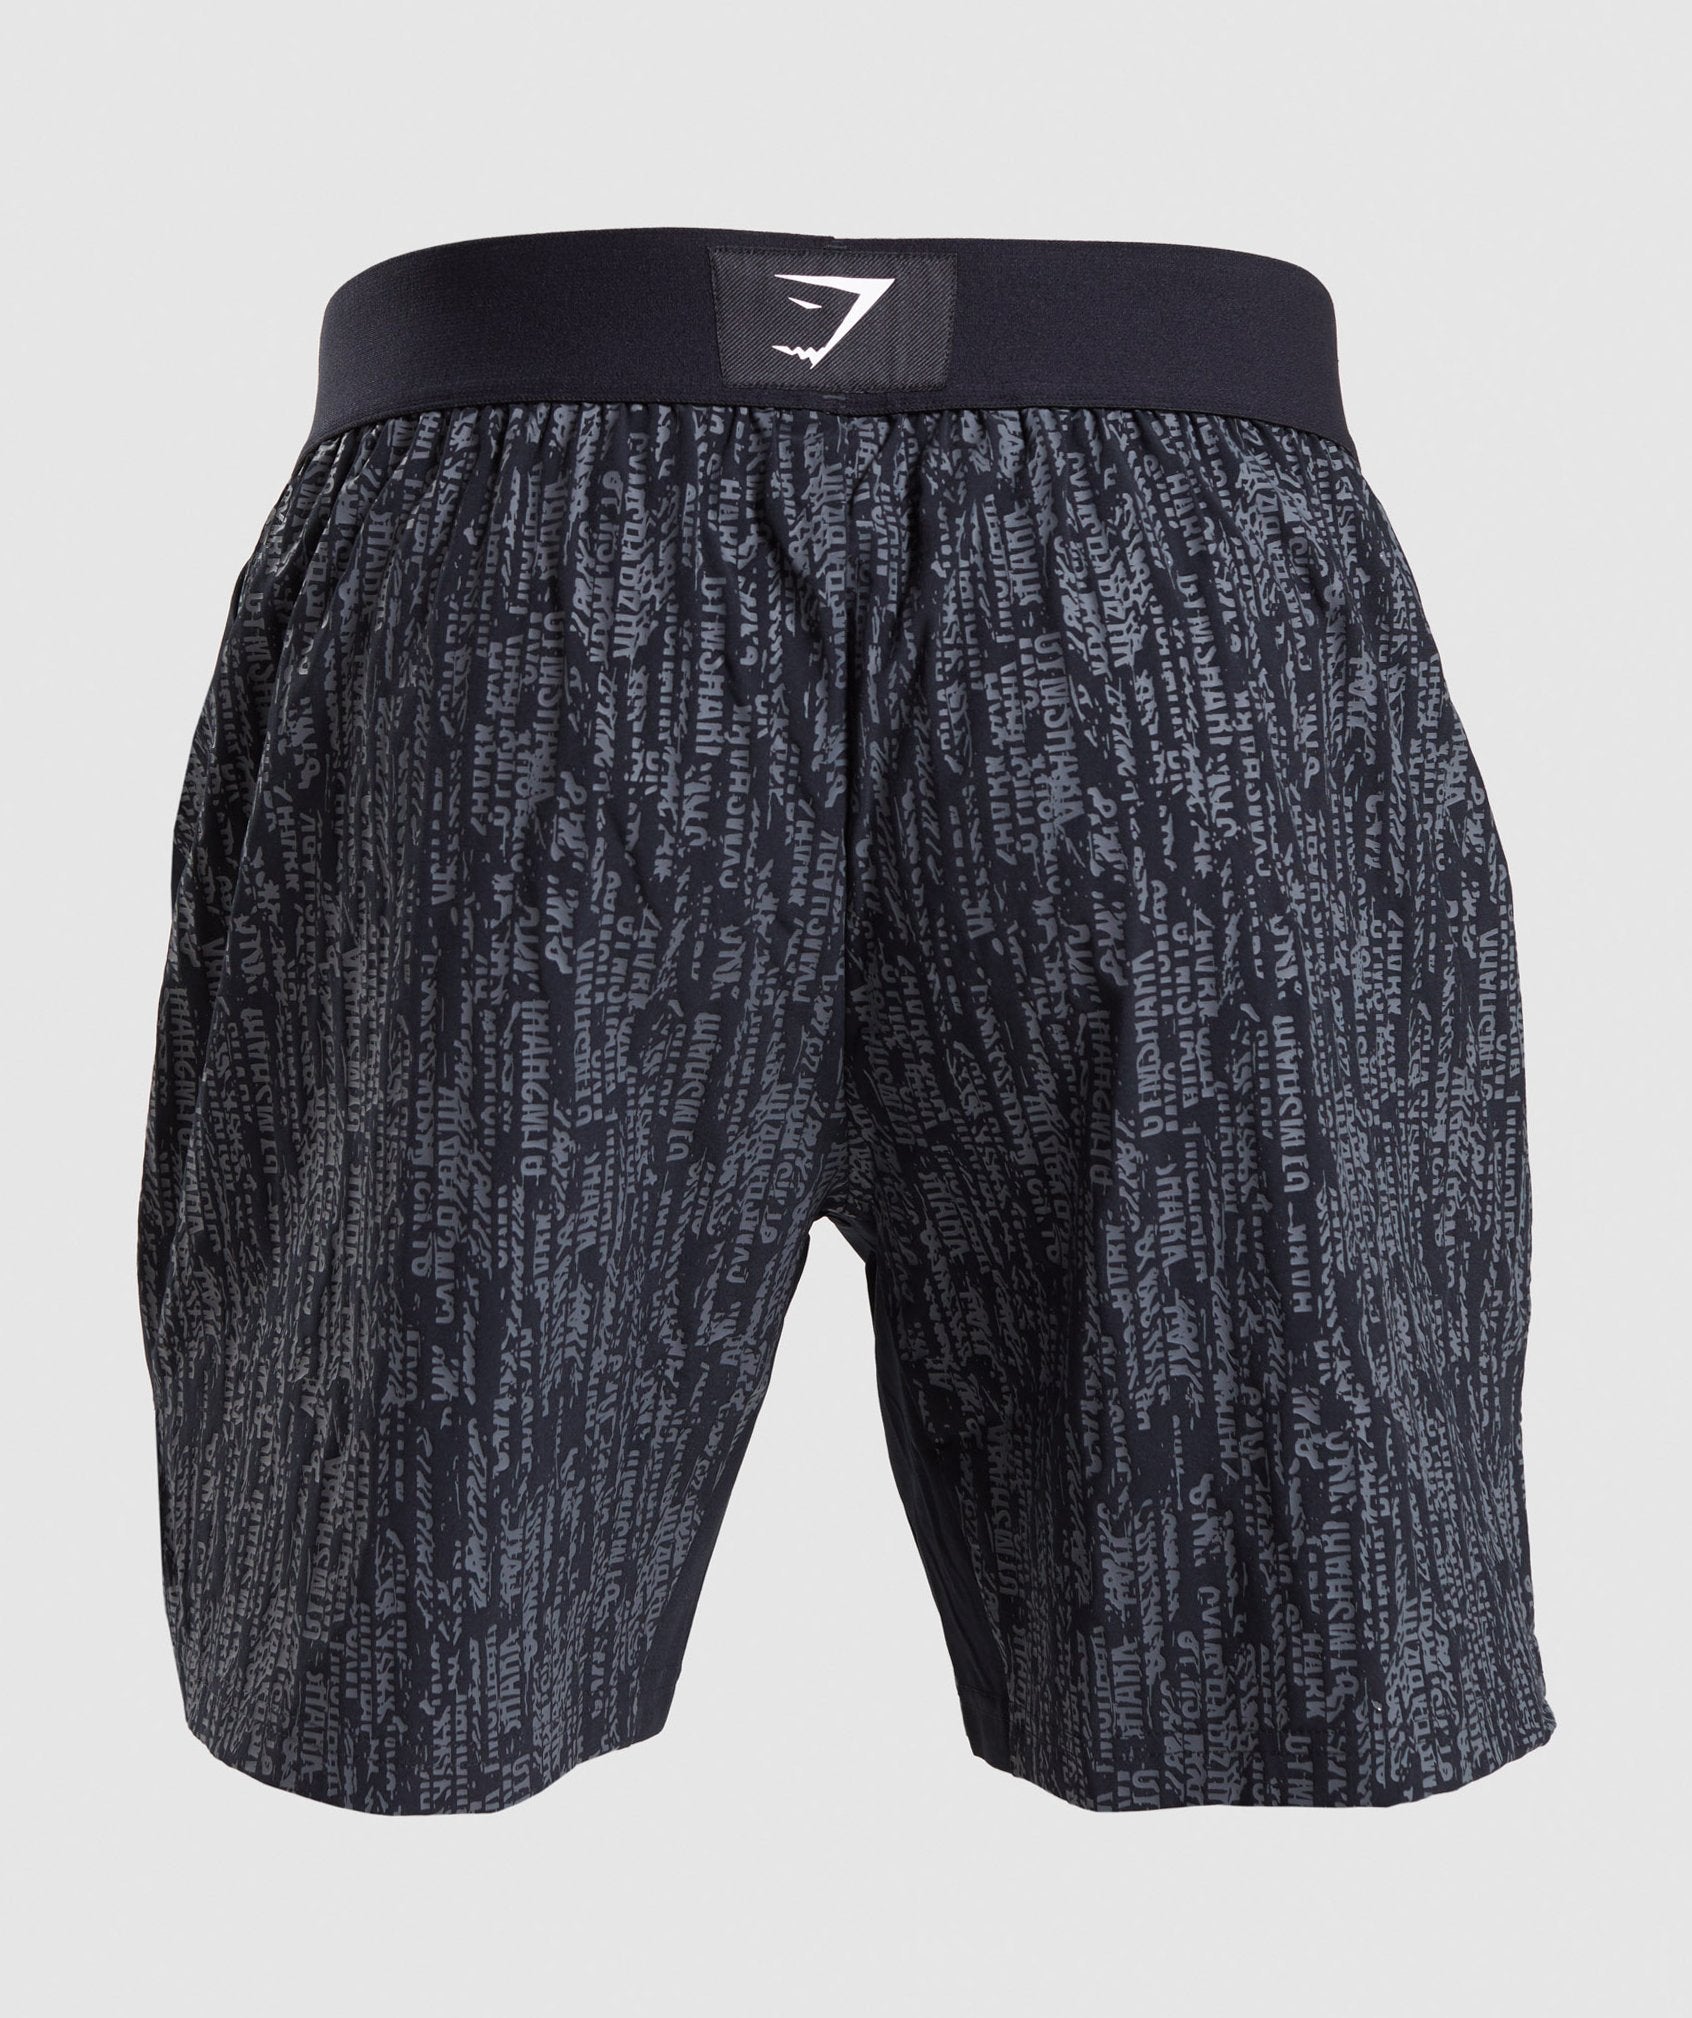 Combat 7" Shorts in Black - view 3